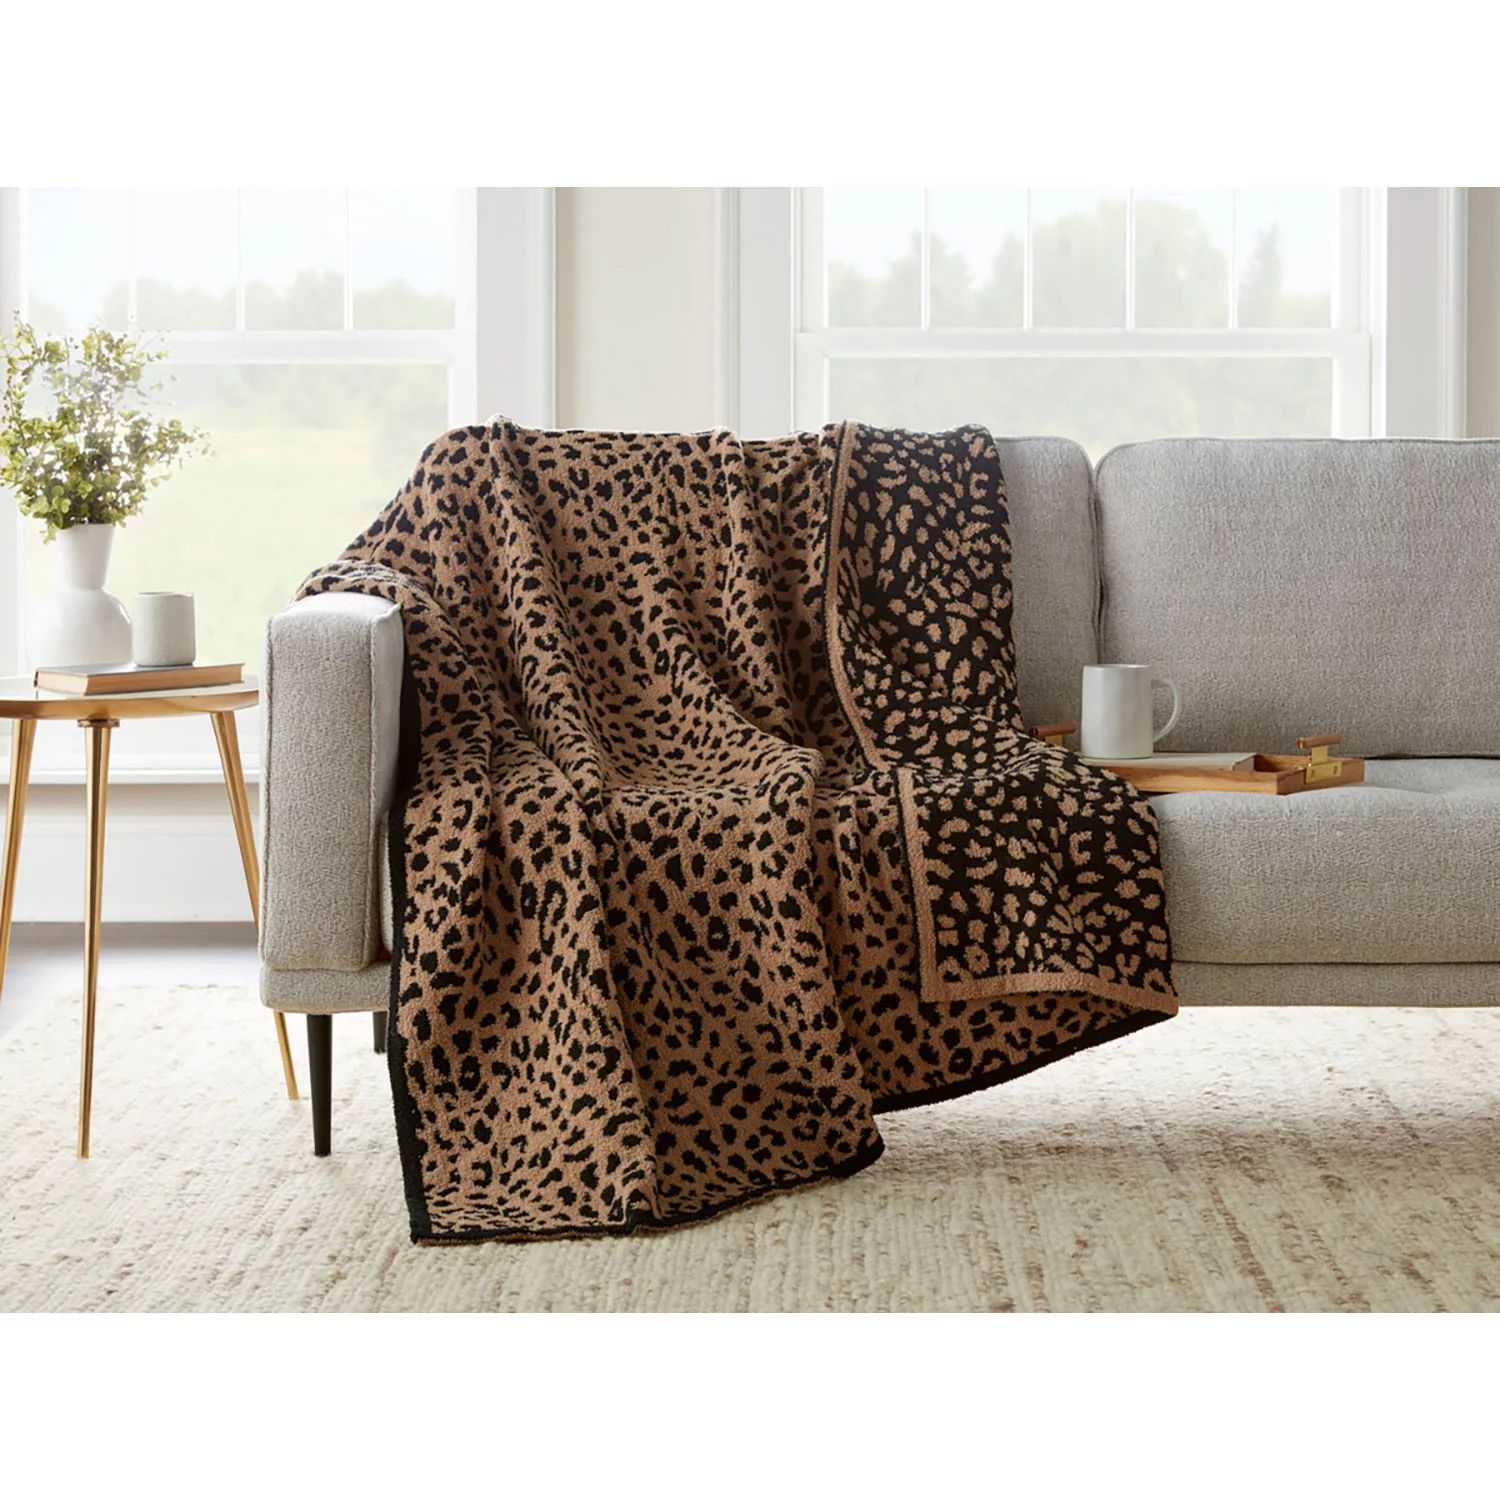 Member's Mark Luxury Premier Collection Cozy Knit Animal Print Throw (Assorted Colors) | Sam's Club